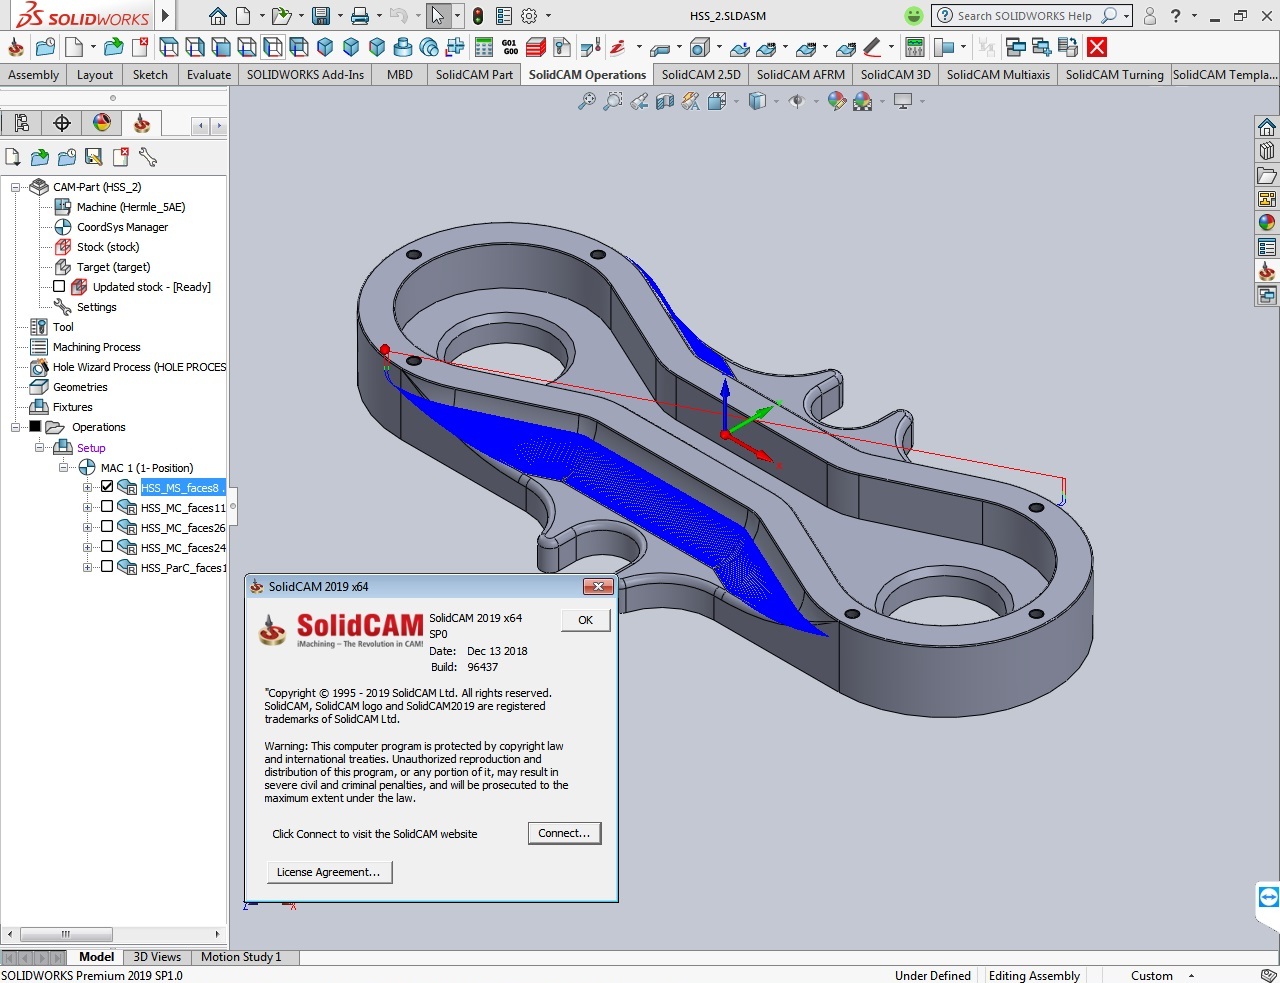 programming with SolidCAM 2019 SP0 for SolidWorks 2012-2019 full